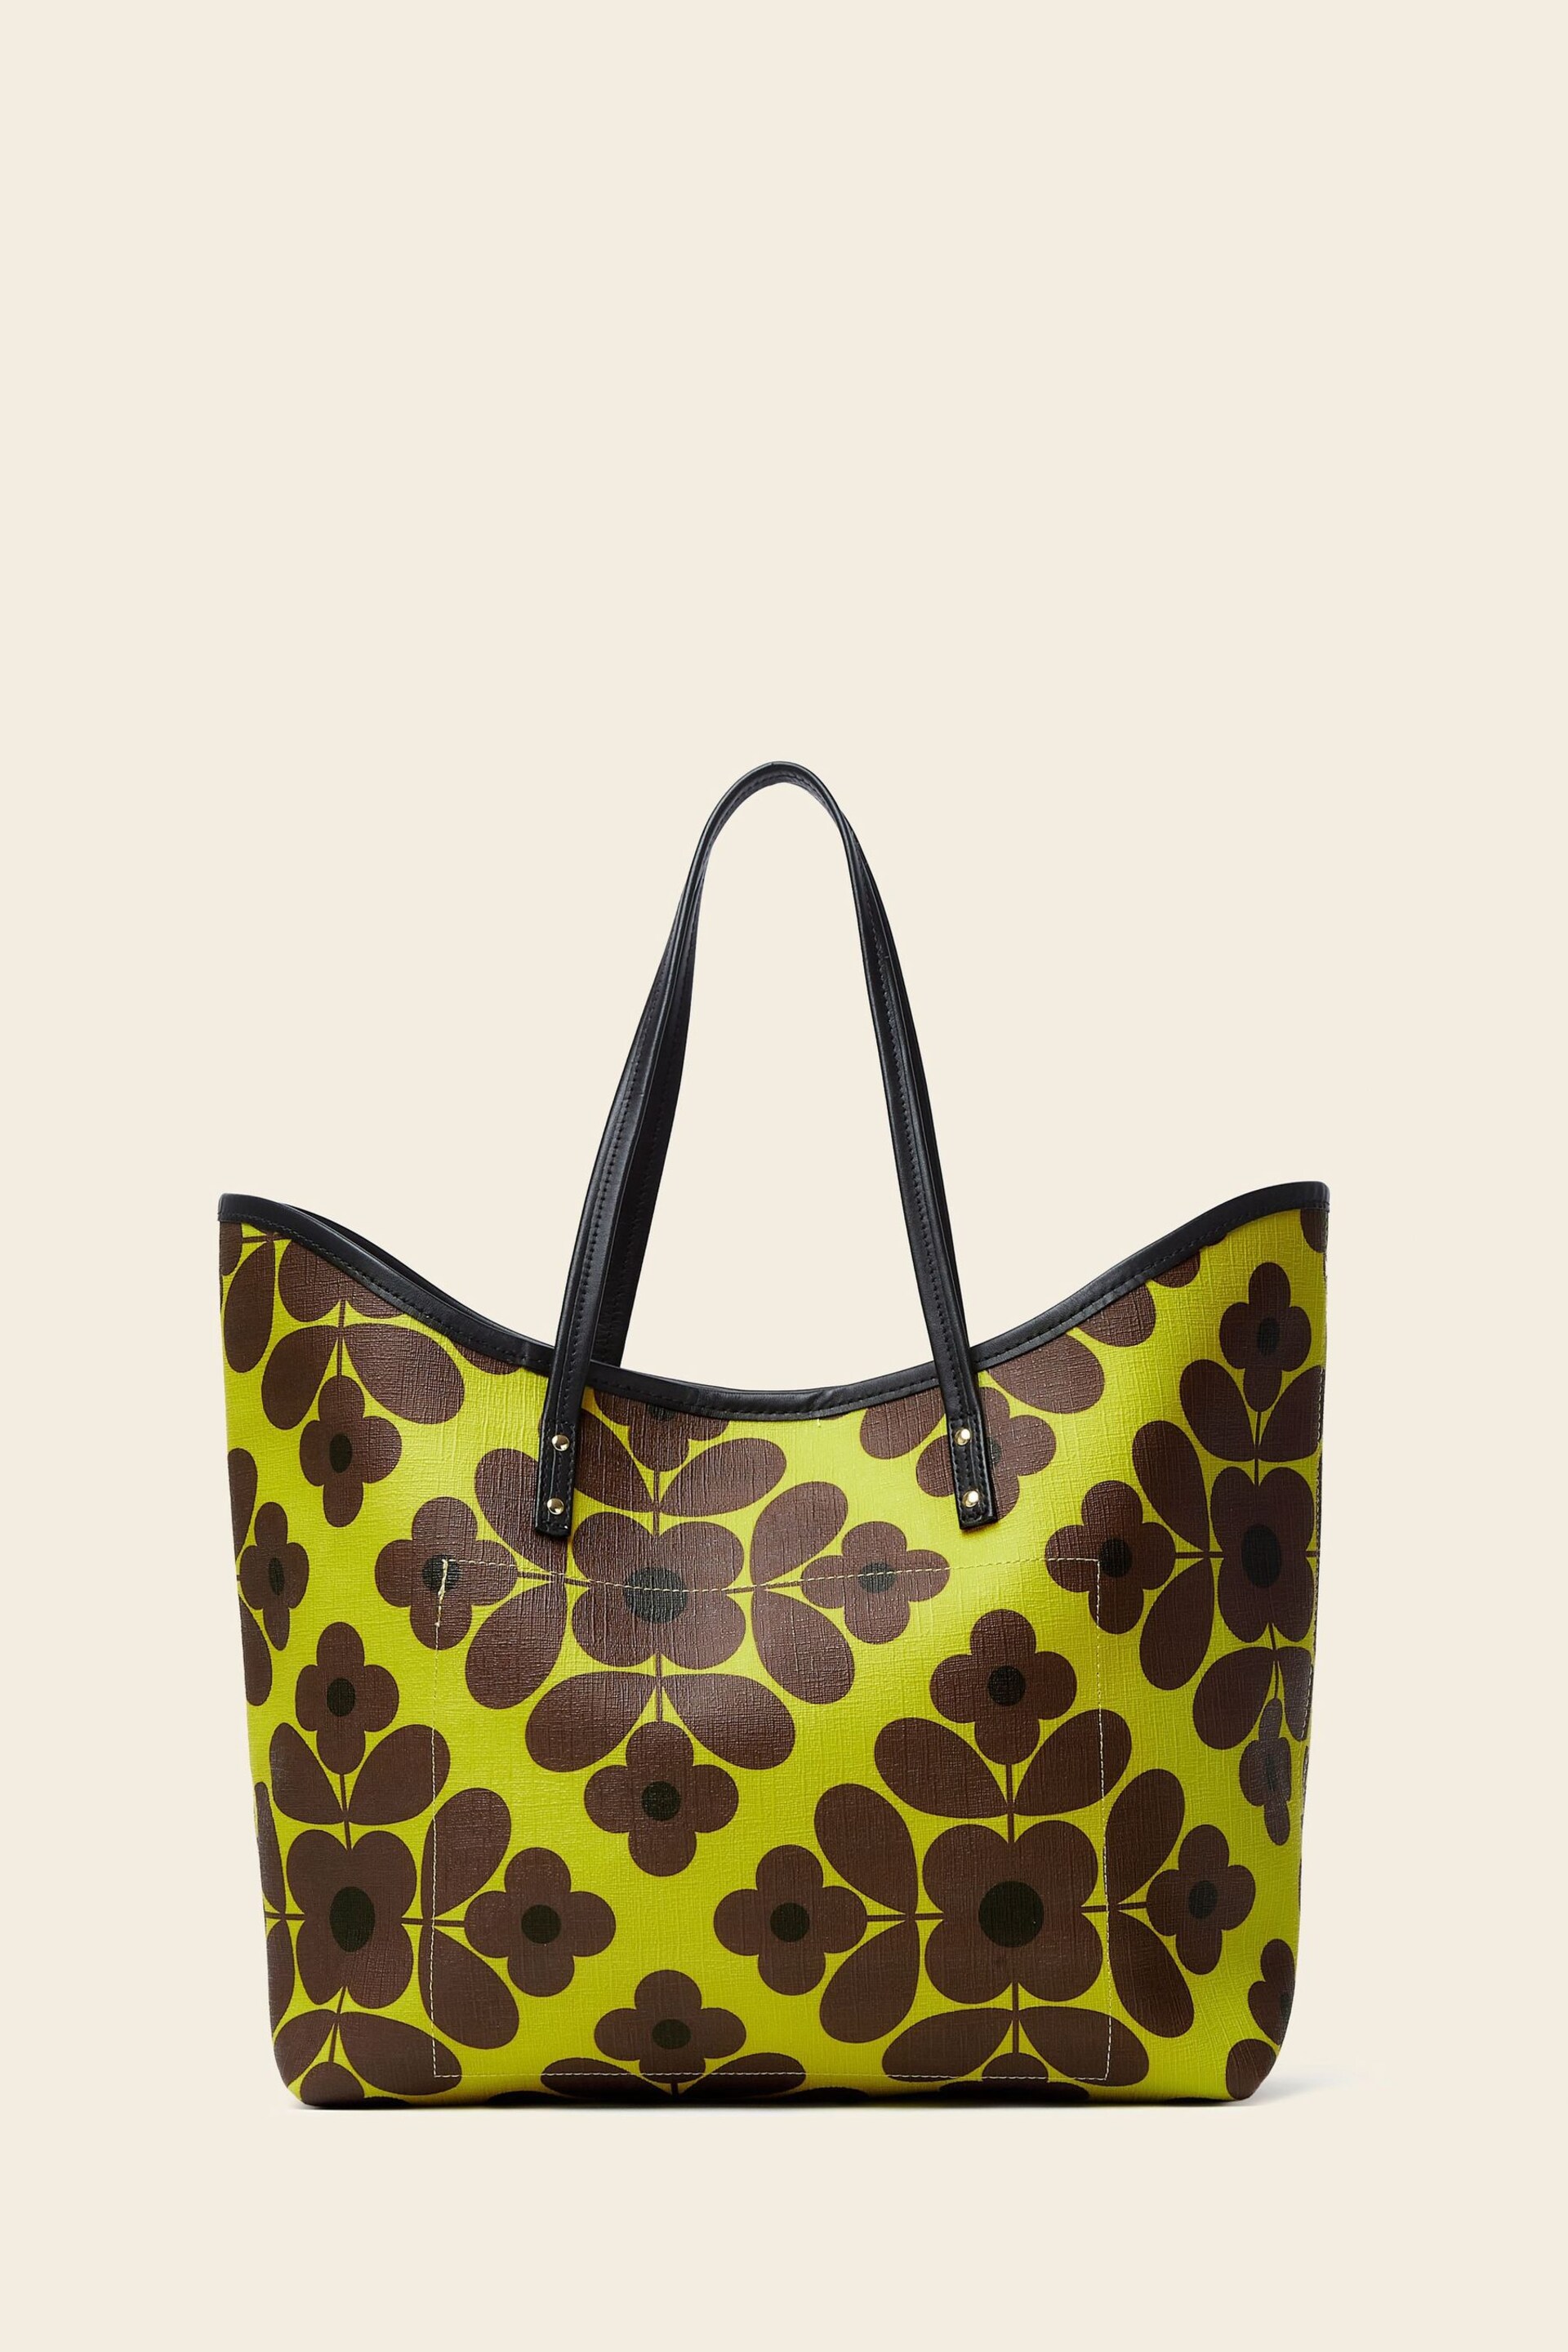 Orla Kiely Green Carrymore Tote Bag - Image 2 of 4